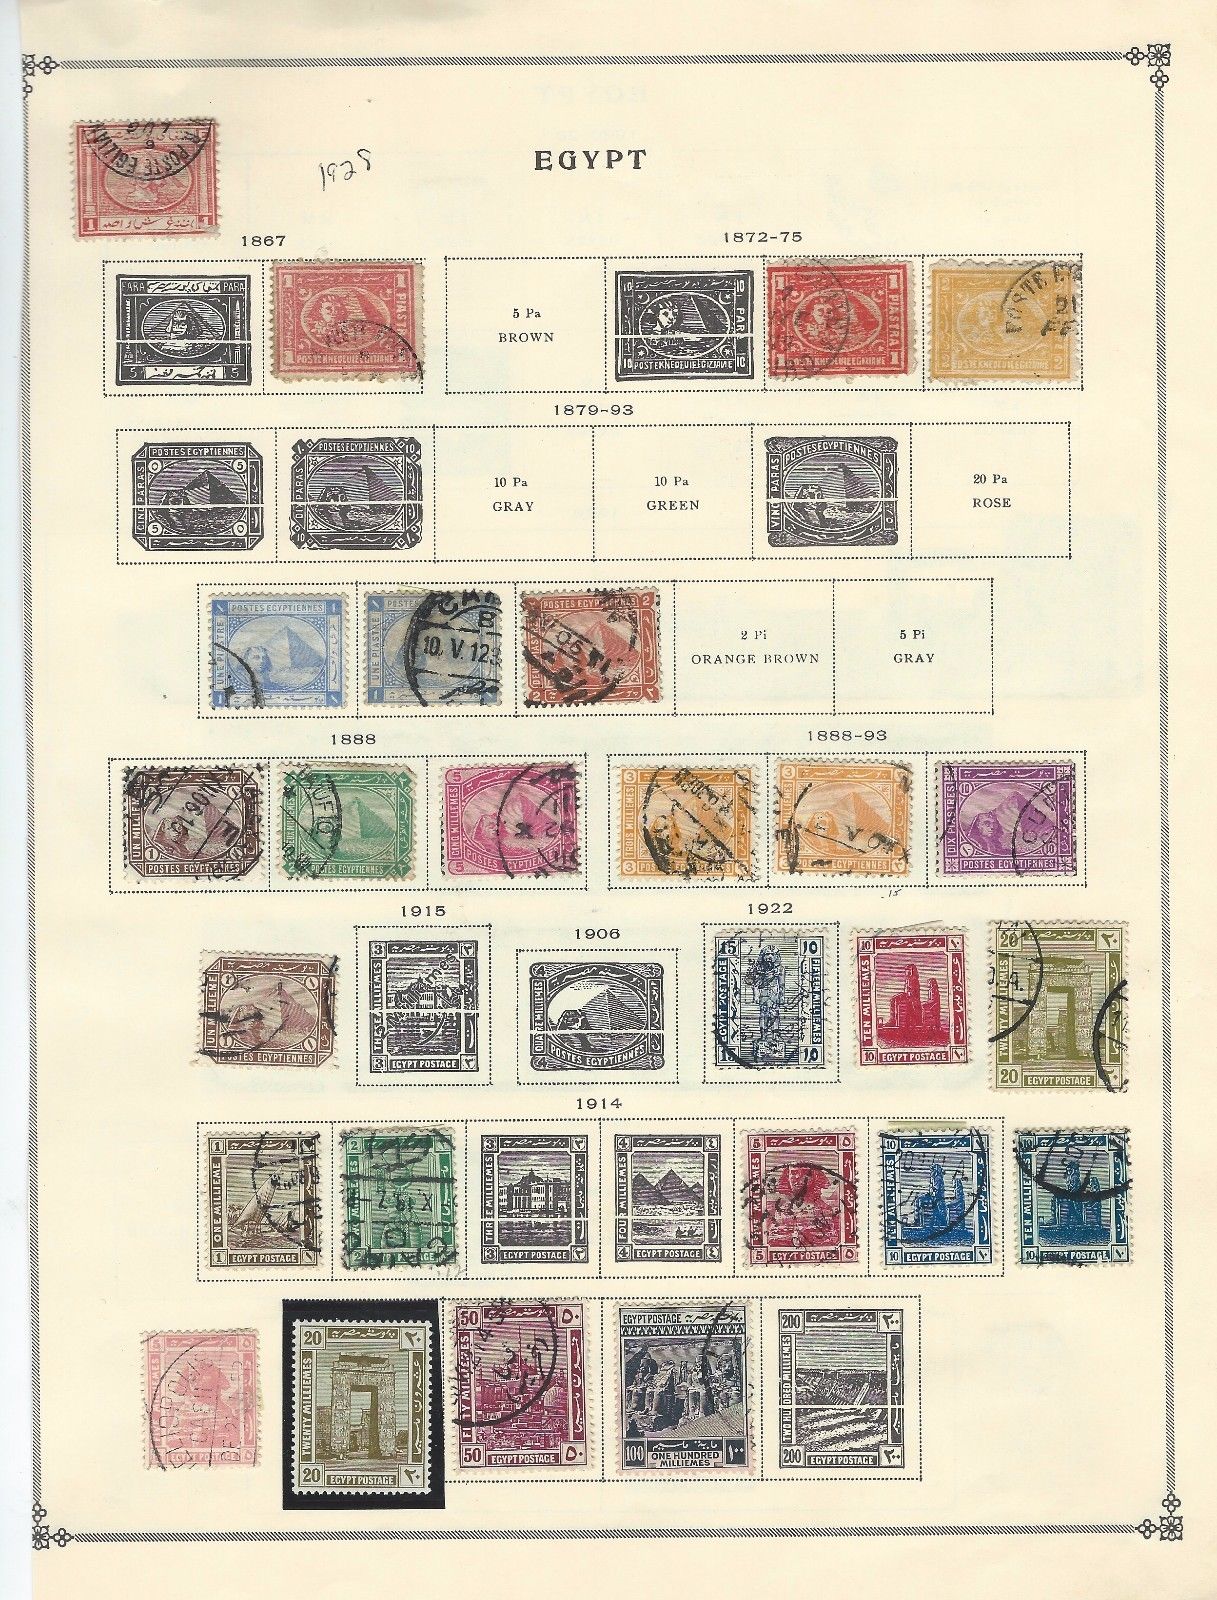 EGYPT - FIRST YEARS / EARLY YEARS USED STAMPS COLLECTION (1867-1928)